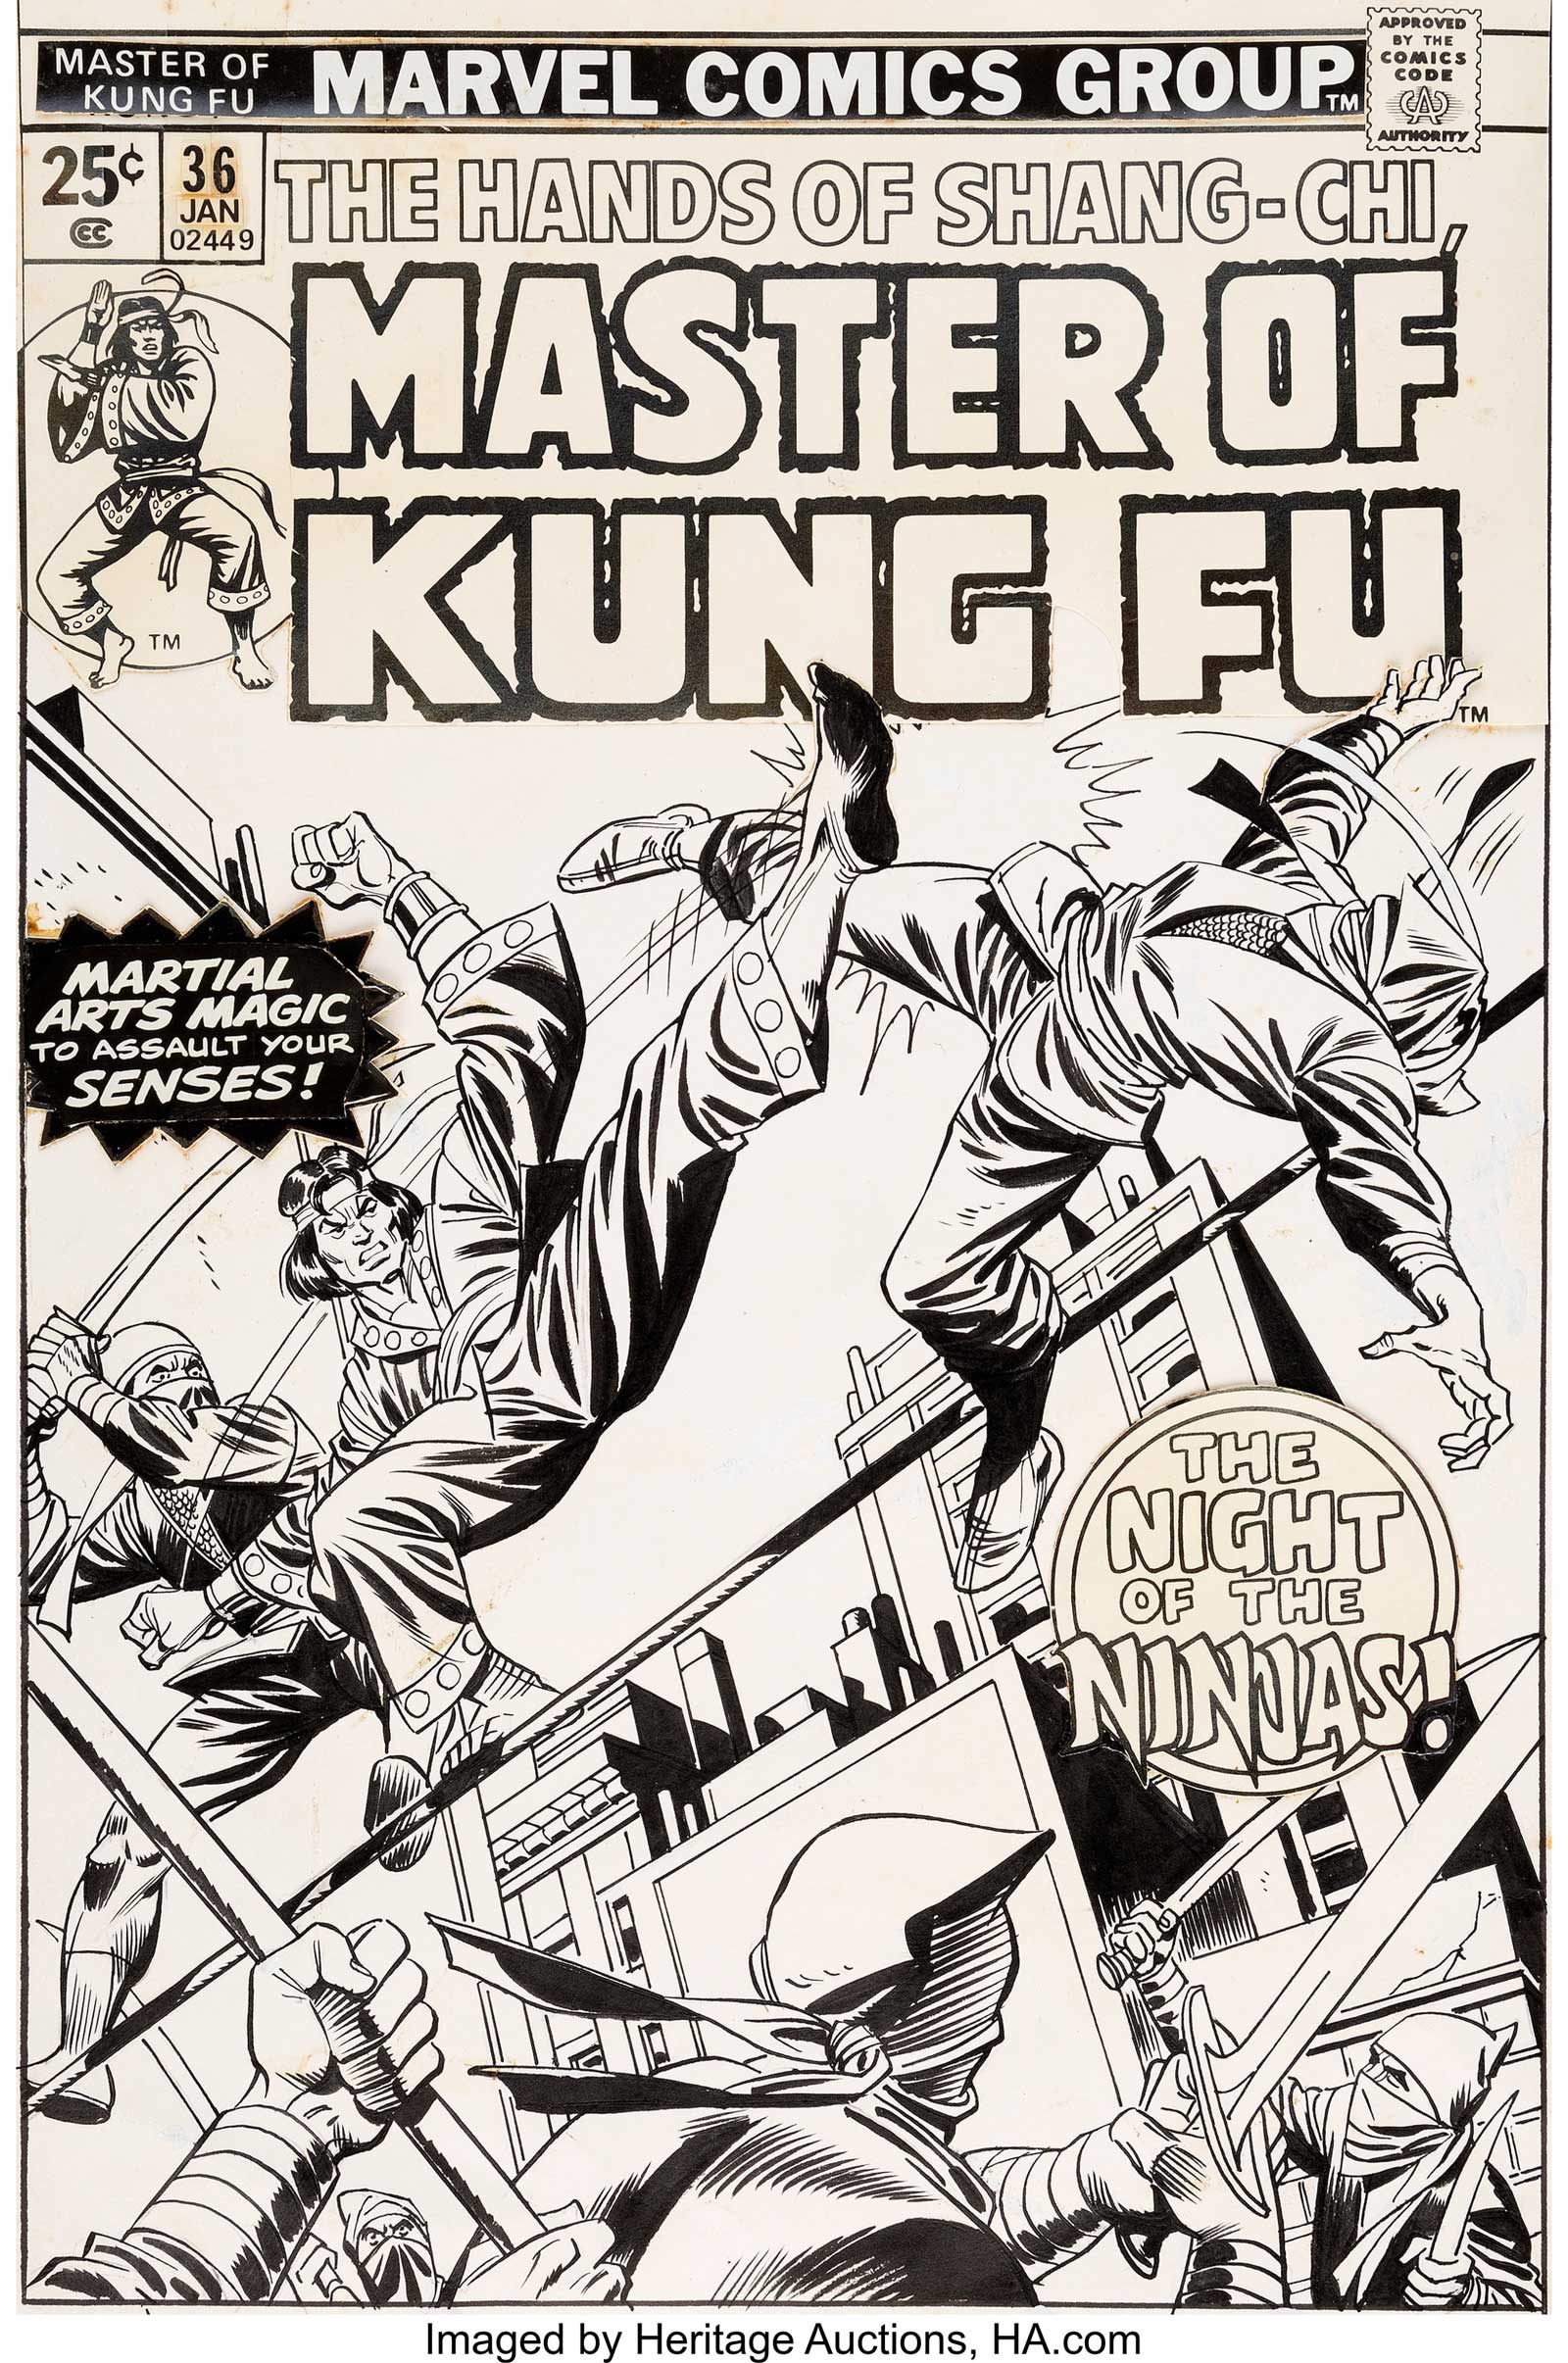 Master of Kung Fu #36 (Marvel, 1976) by Gil Kane and Mike Esposito